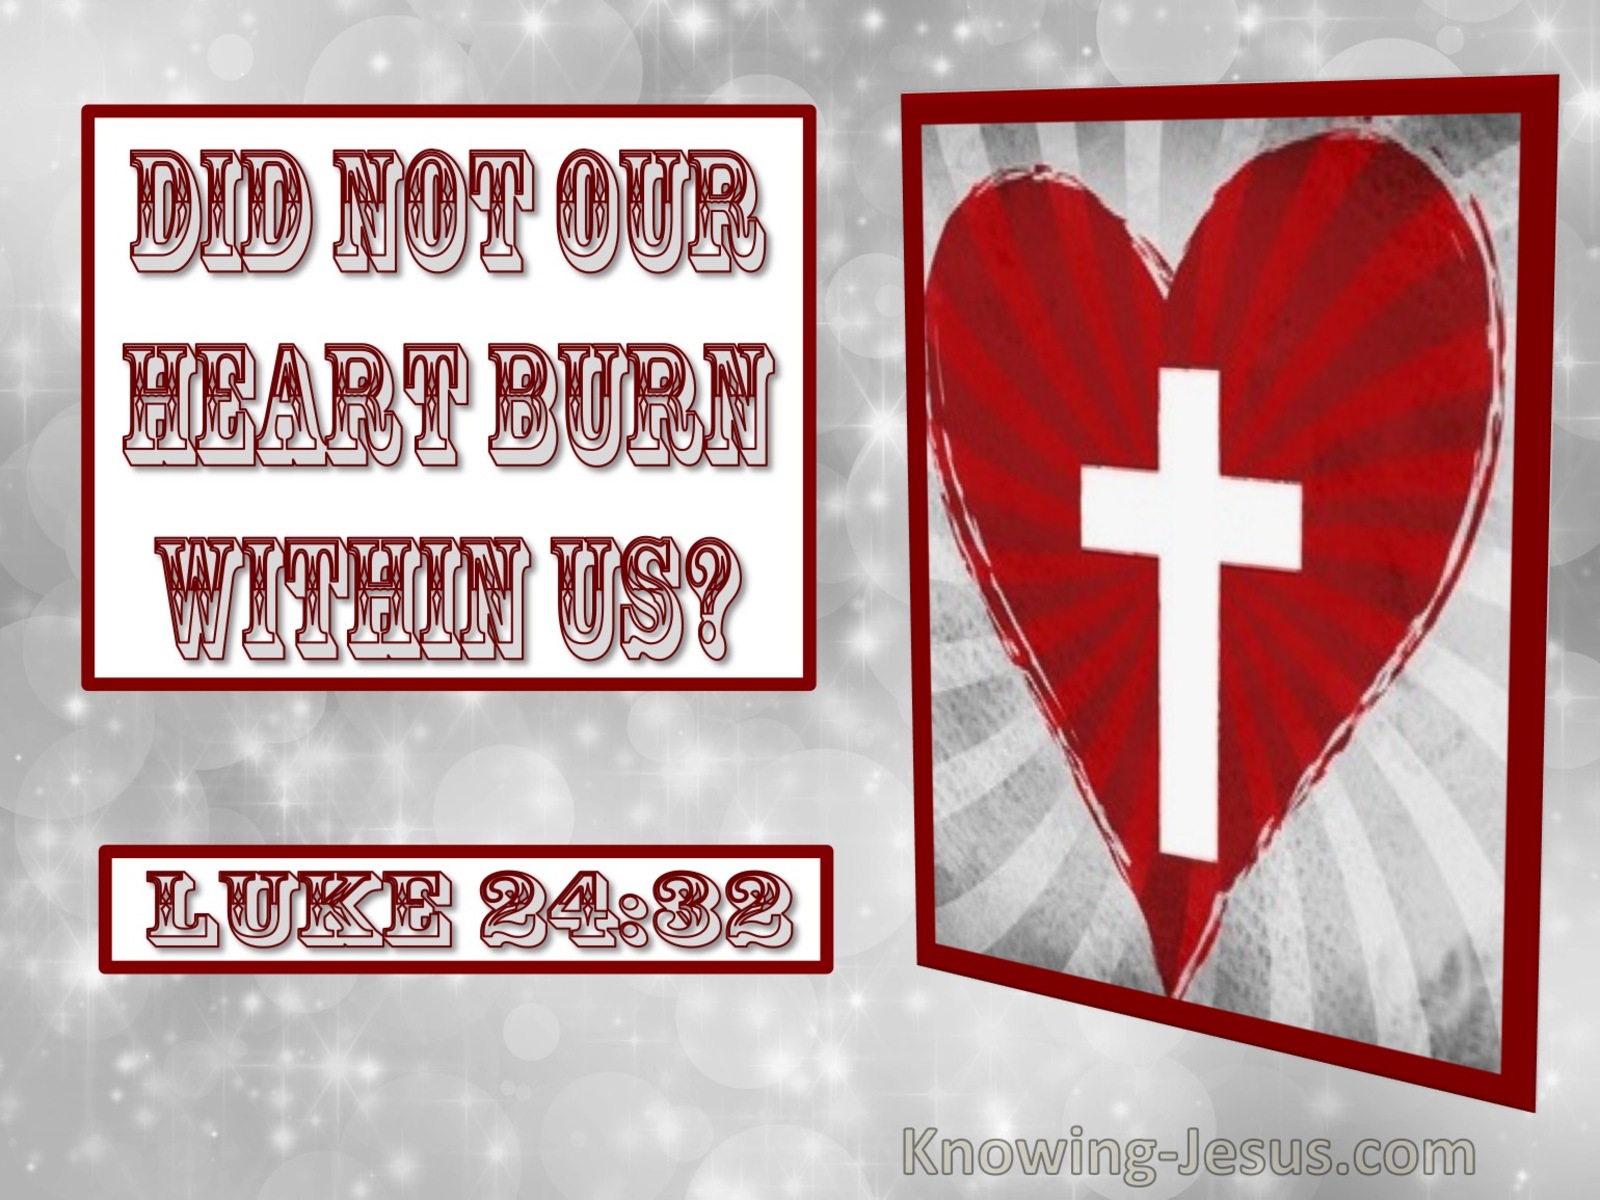 Luke 24:32 Did Not Our Heart Burn Within Us (utmost)03:22